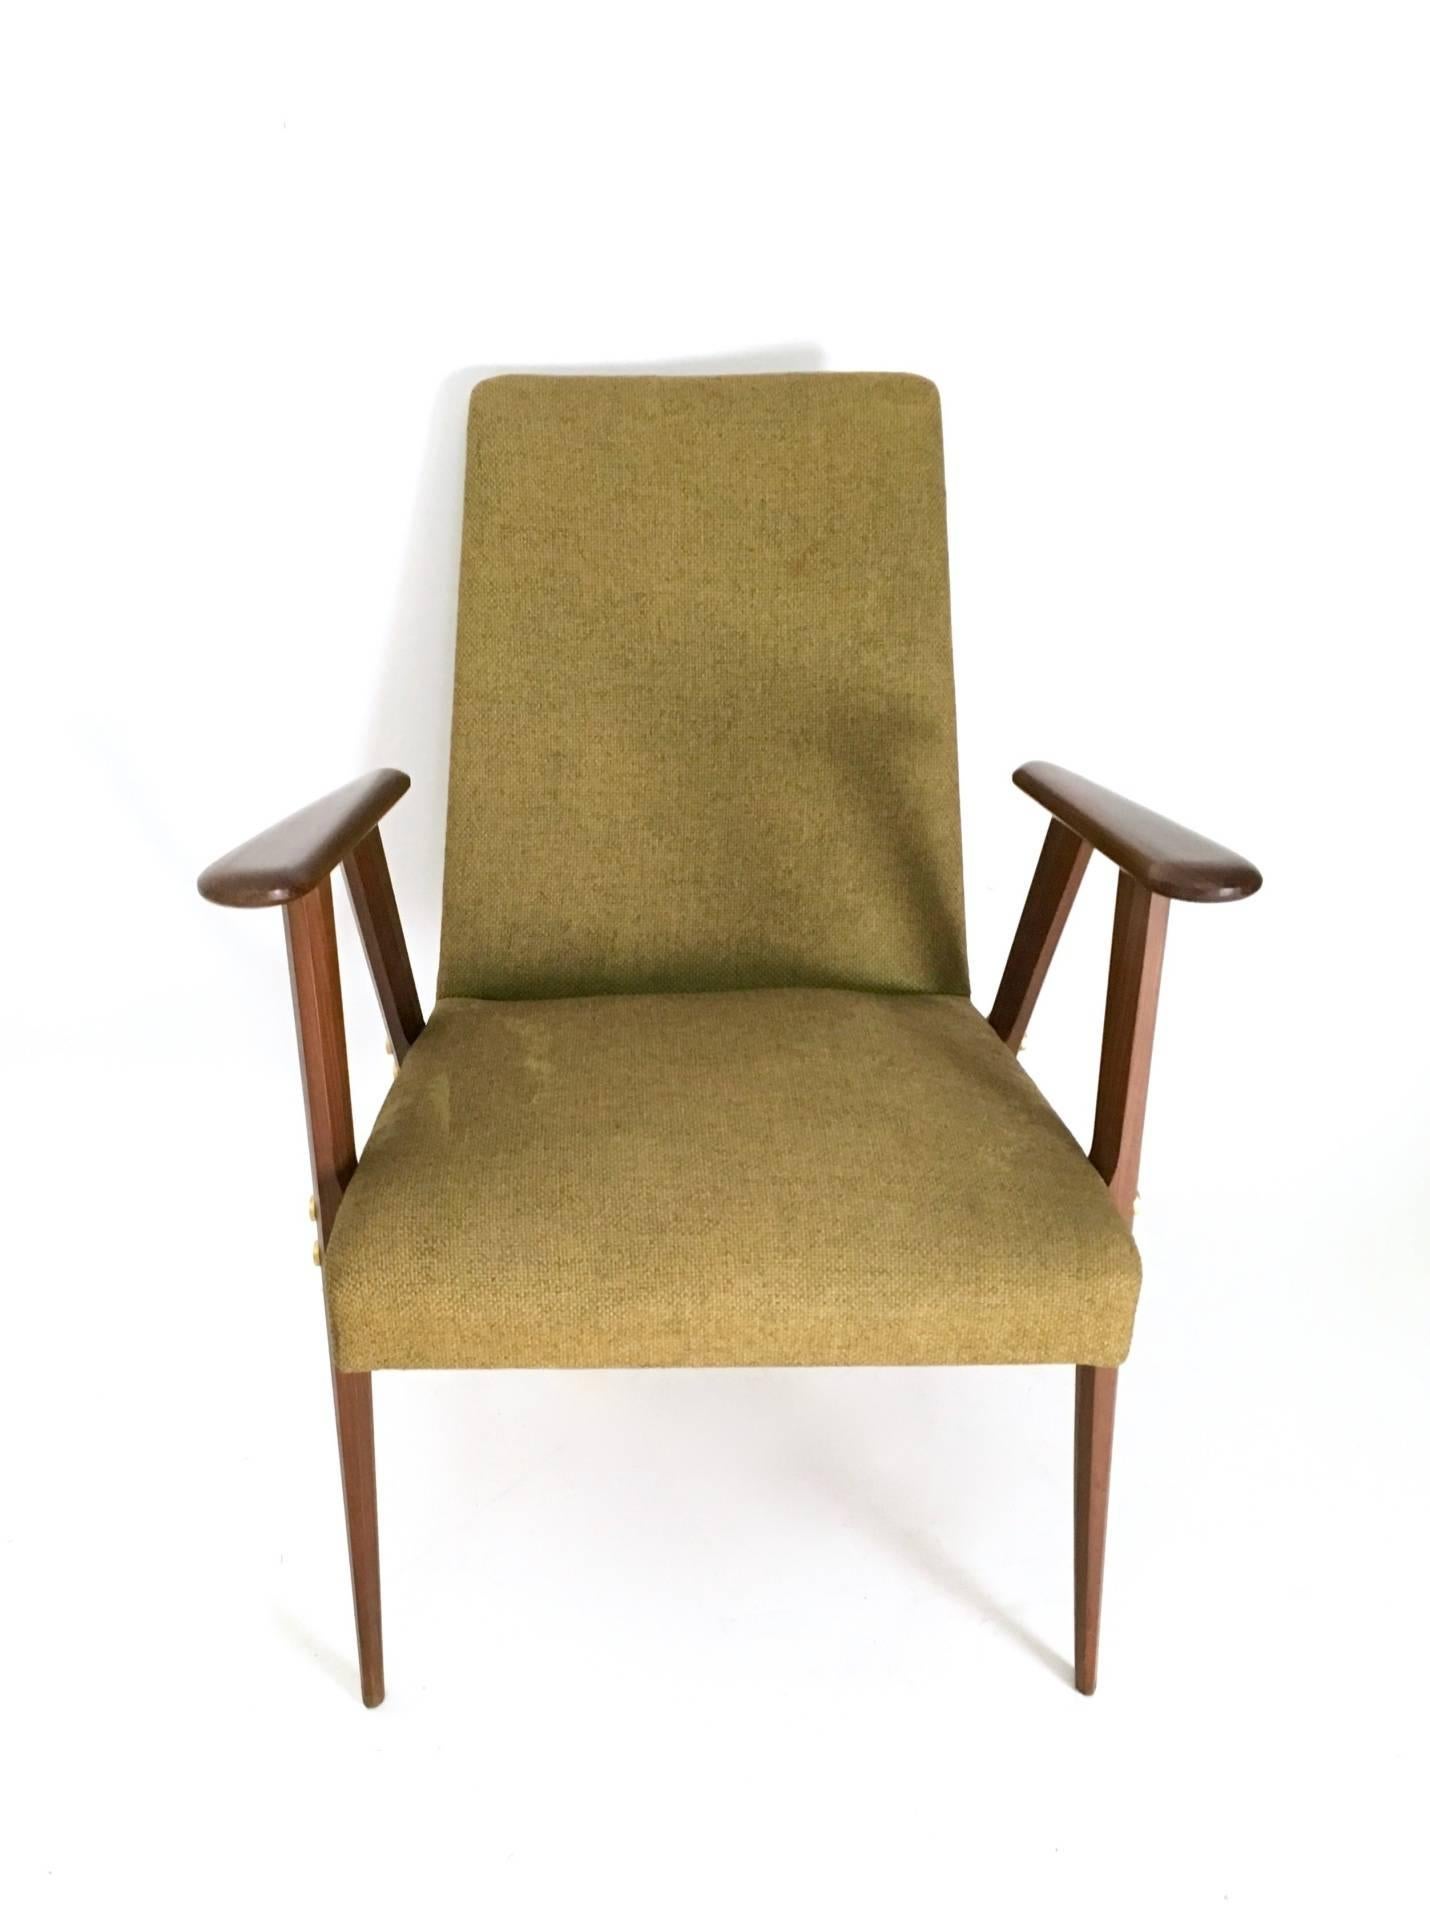 Italian Pair of Fabric and Wood Armchairs, Italy, 1950s